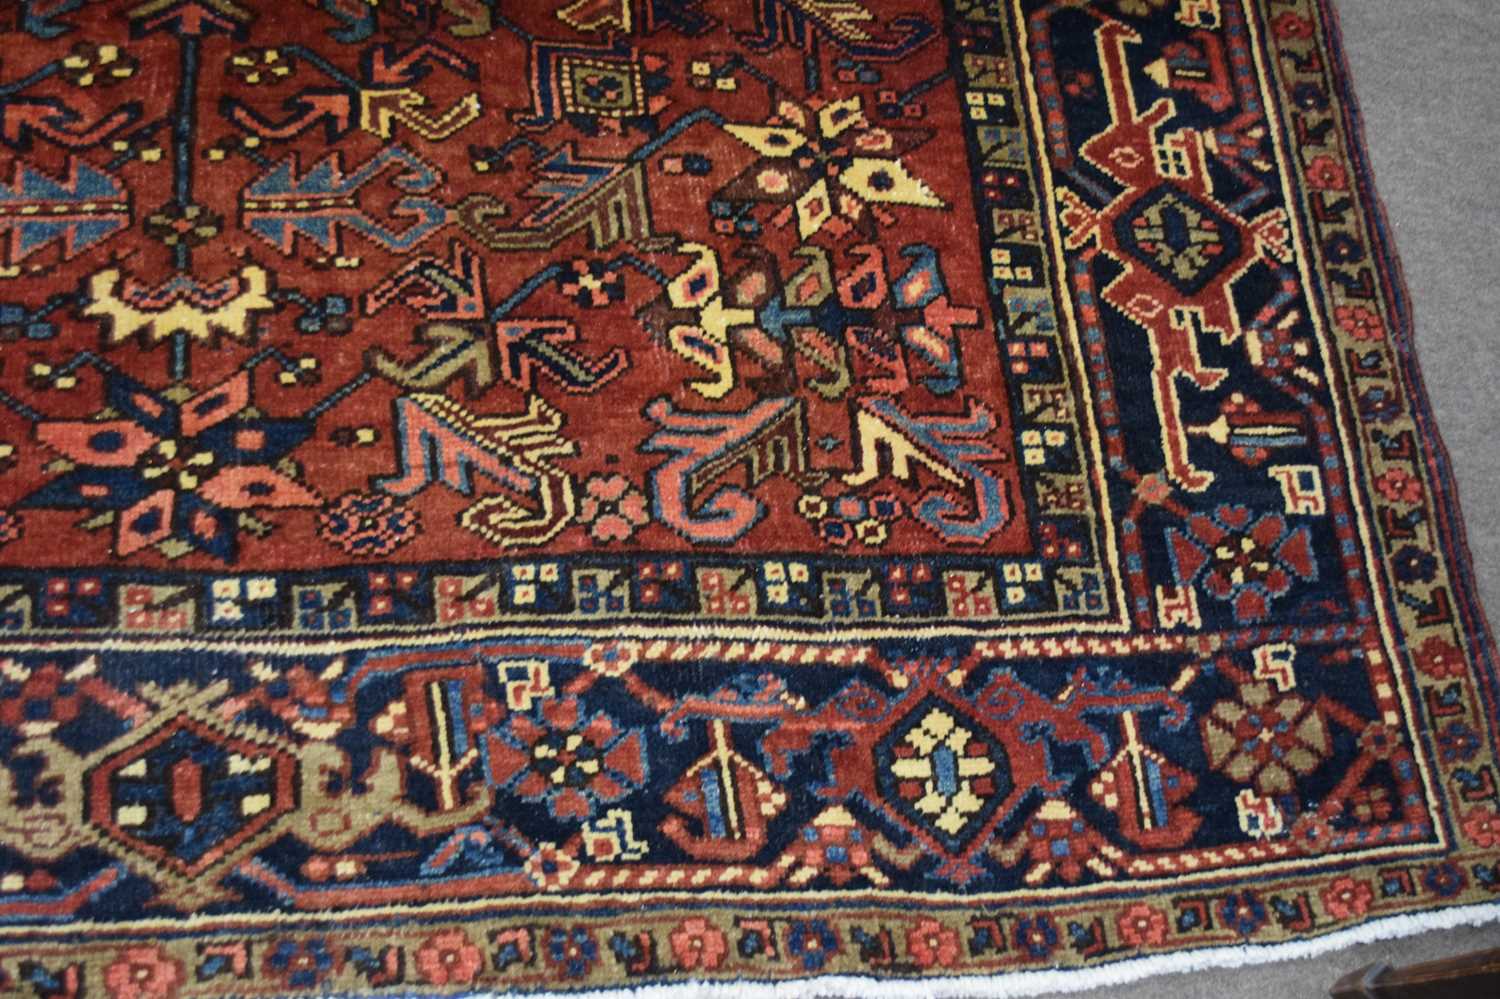 20th century Heriz wool floor rug decorated with stylised floral and geometric design on a - Image 2 of 3